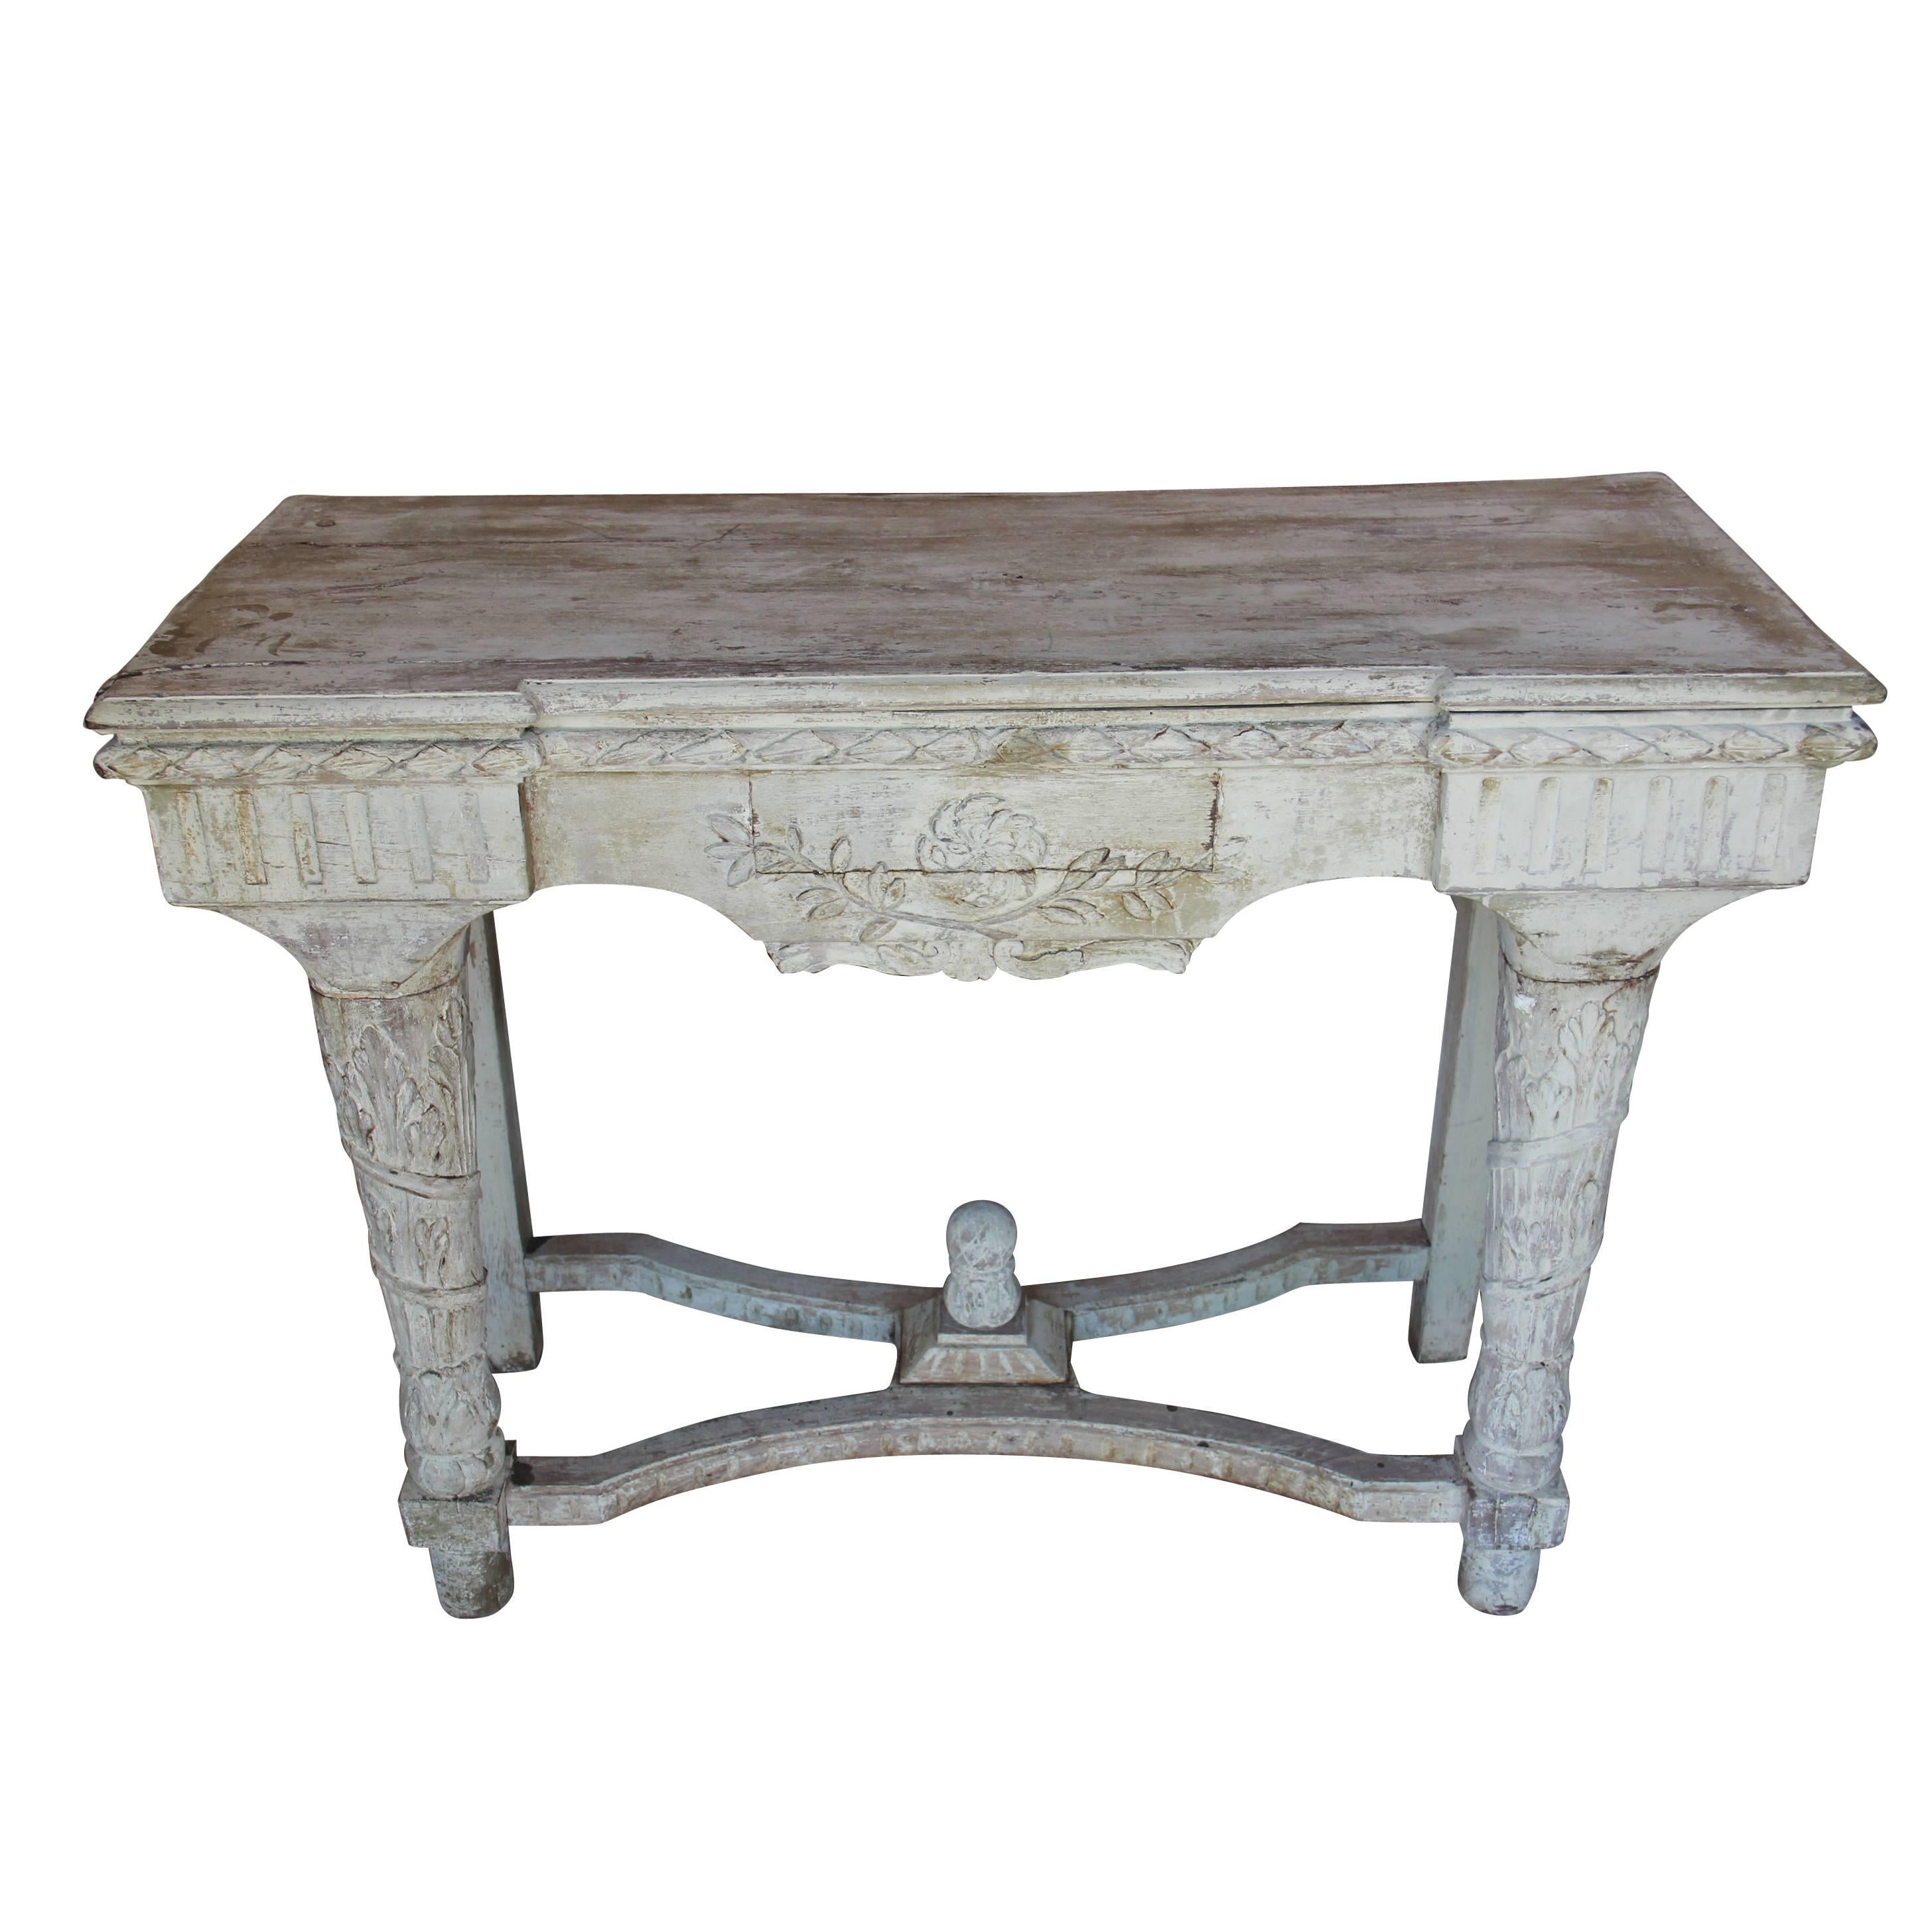 A richly carved French Louis XVI style console table in original cream colored paint from the 19th century. The patina on this piece is amazing. Found in the south of France.